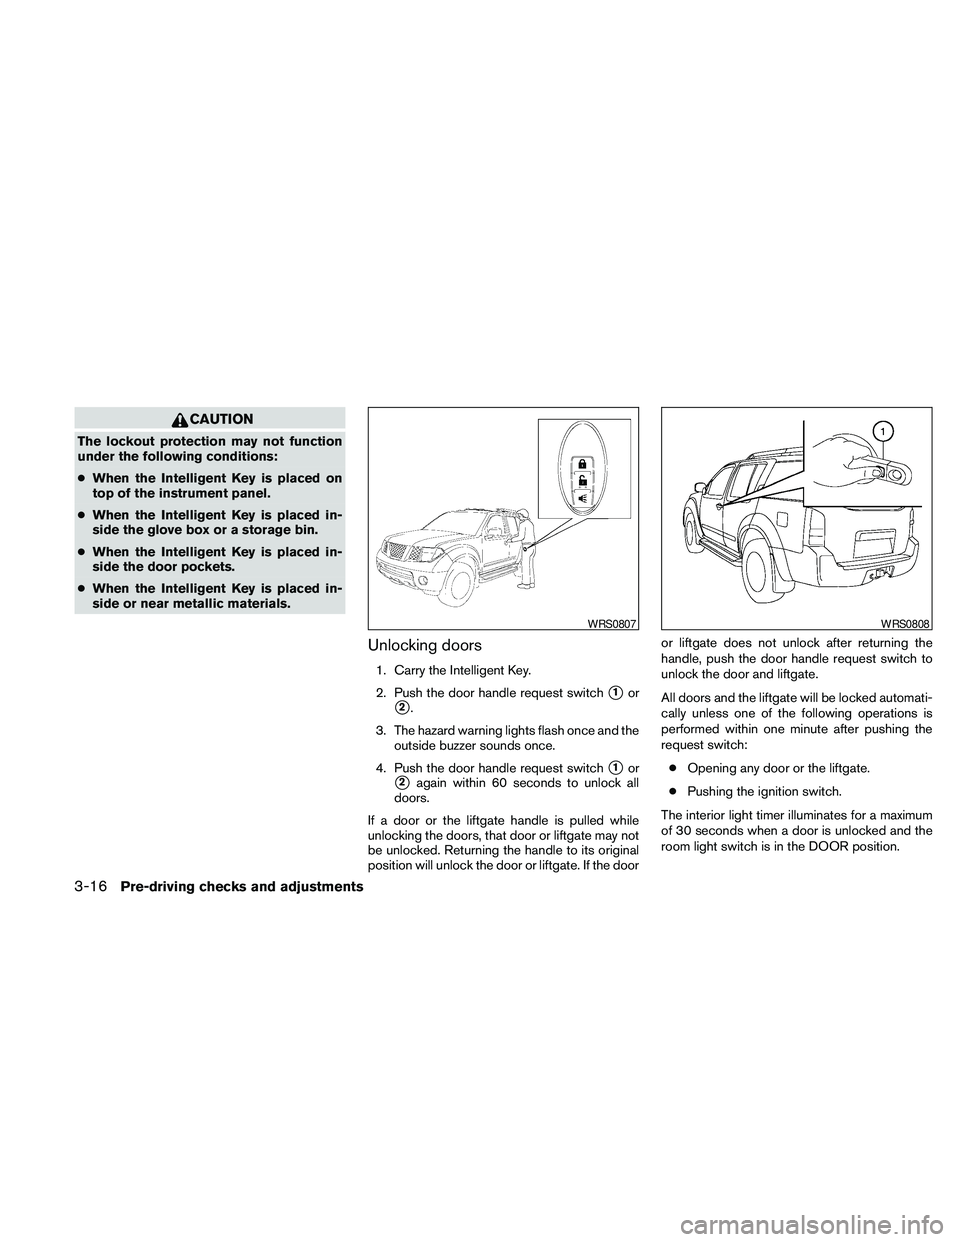 NISSAN PATHFINDER 2010  Owner´s Manual CAUTION
The lockout protection may not function
under the following conditions:
cWhen the Intelligent Key is placed on
top of the instrument panel.
cWhen the Intelligent Key is placed in-
side the glo